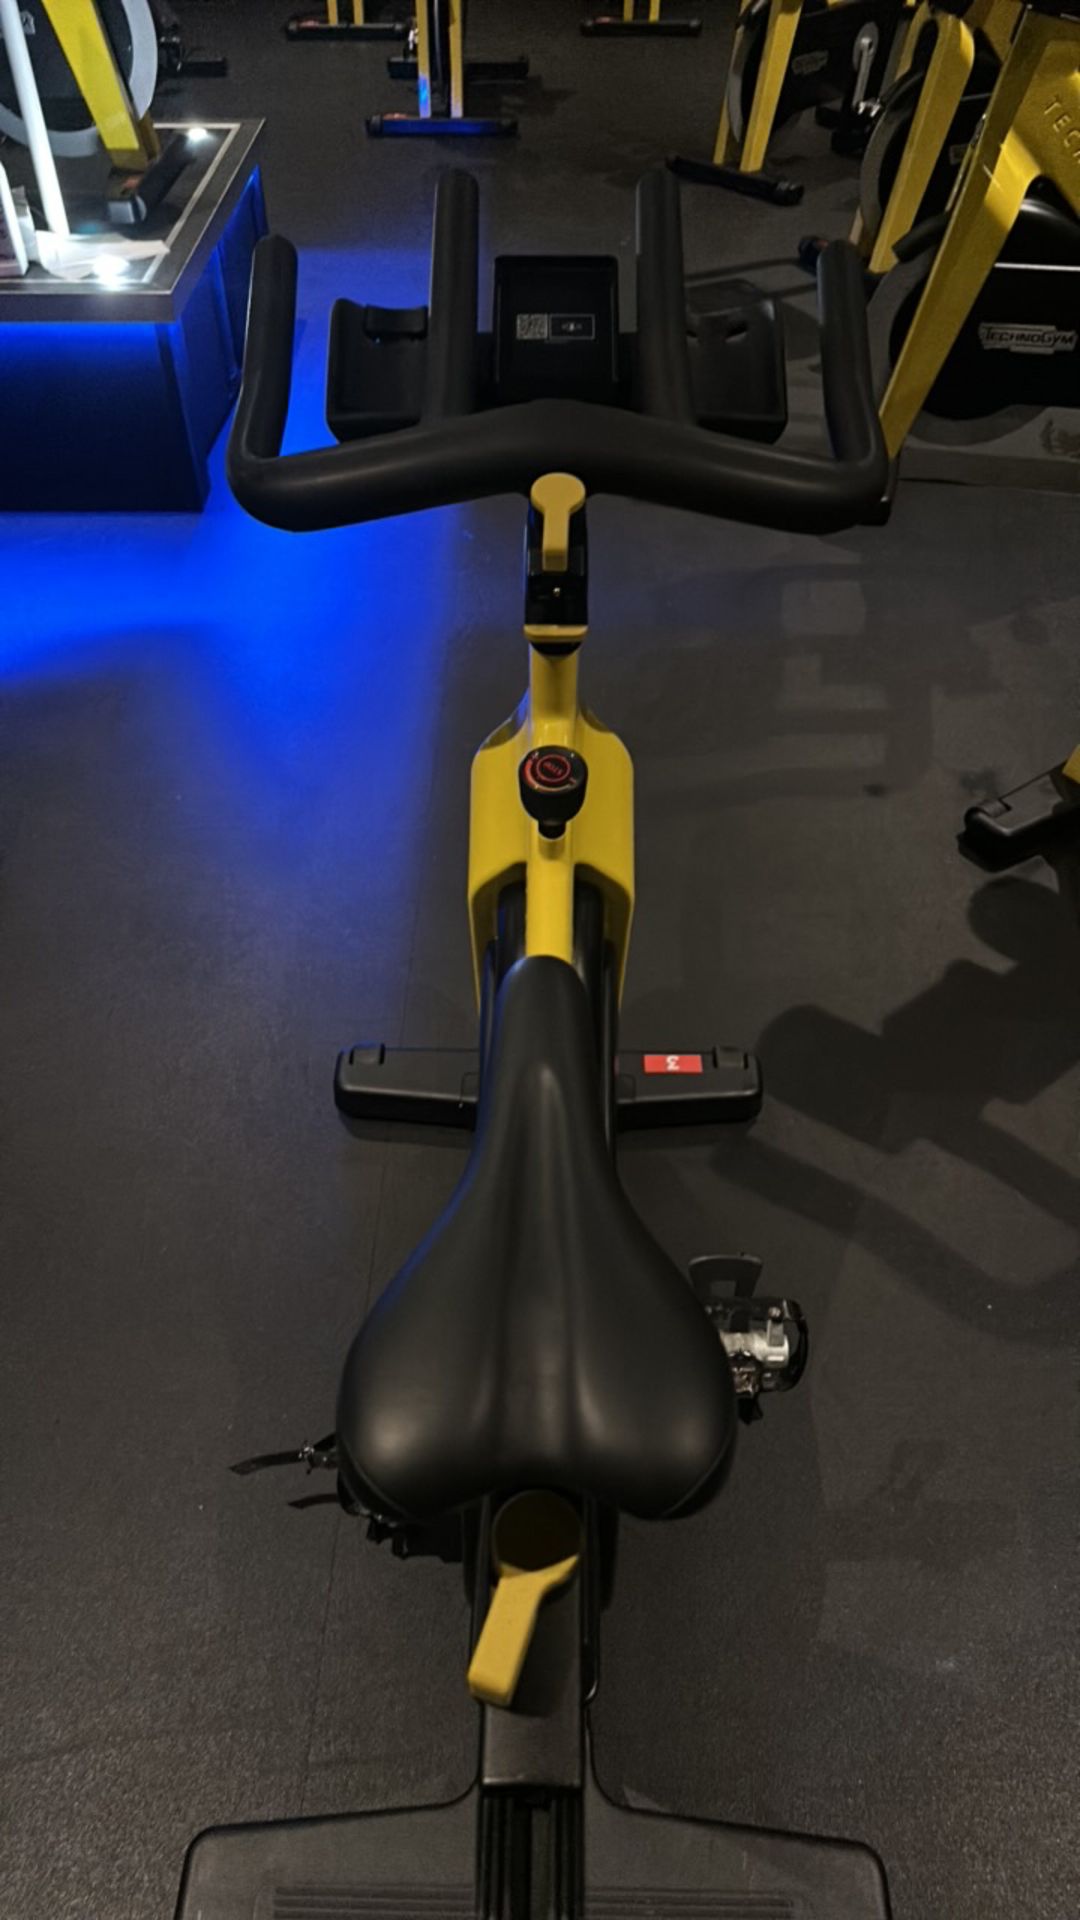 Technogym Spin Bike (Group Cycle) - Image 2 of 4